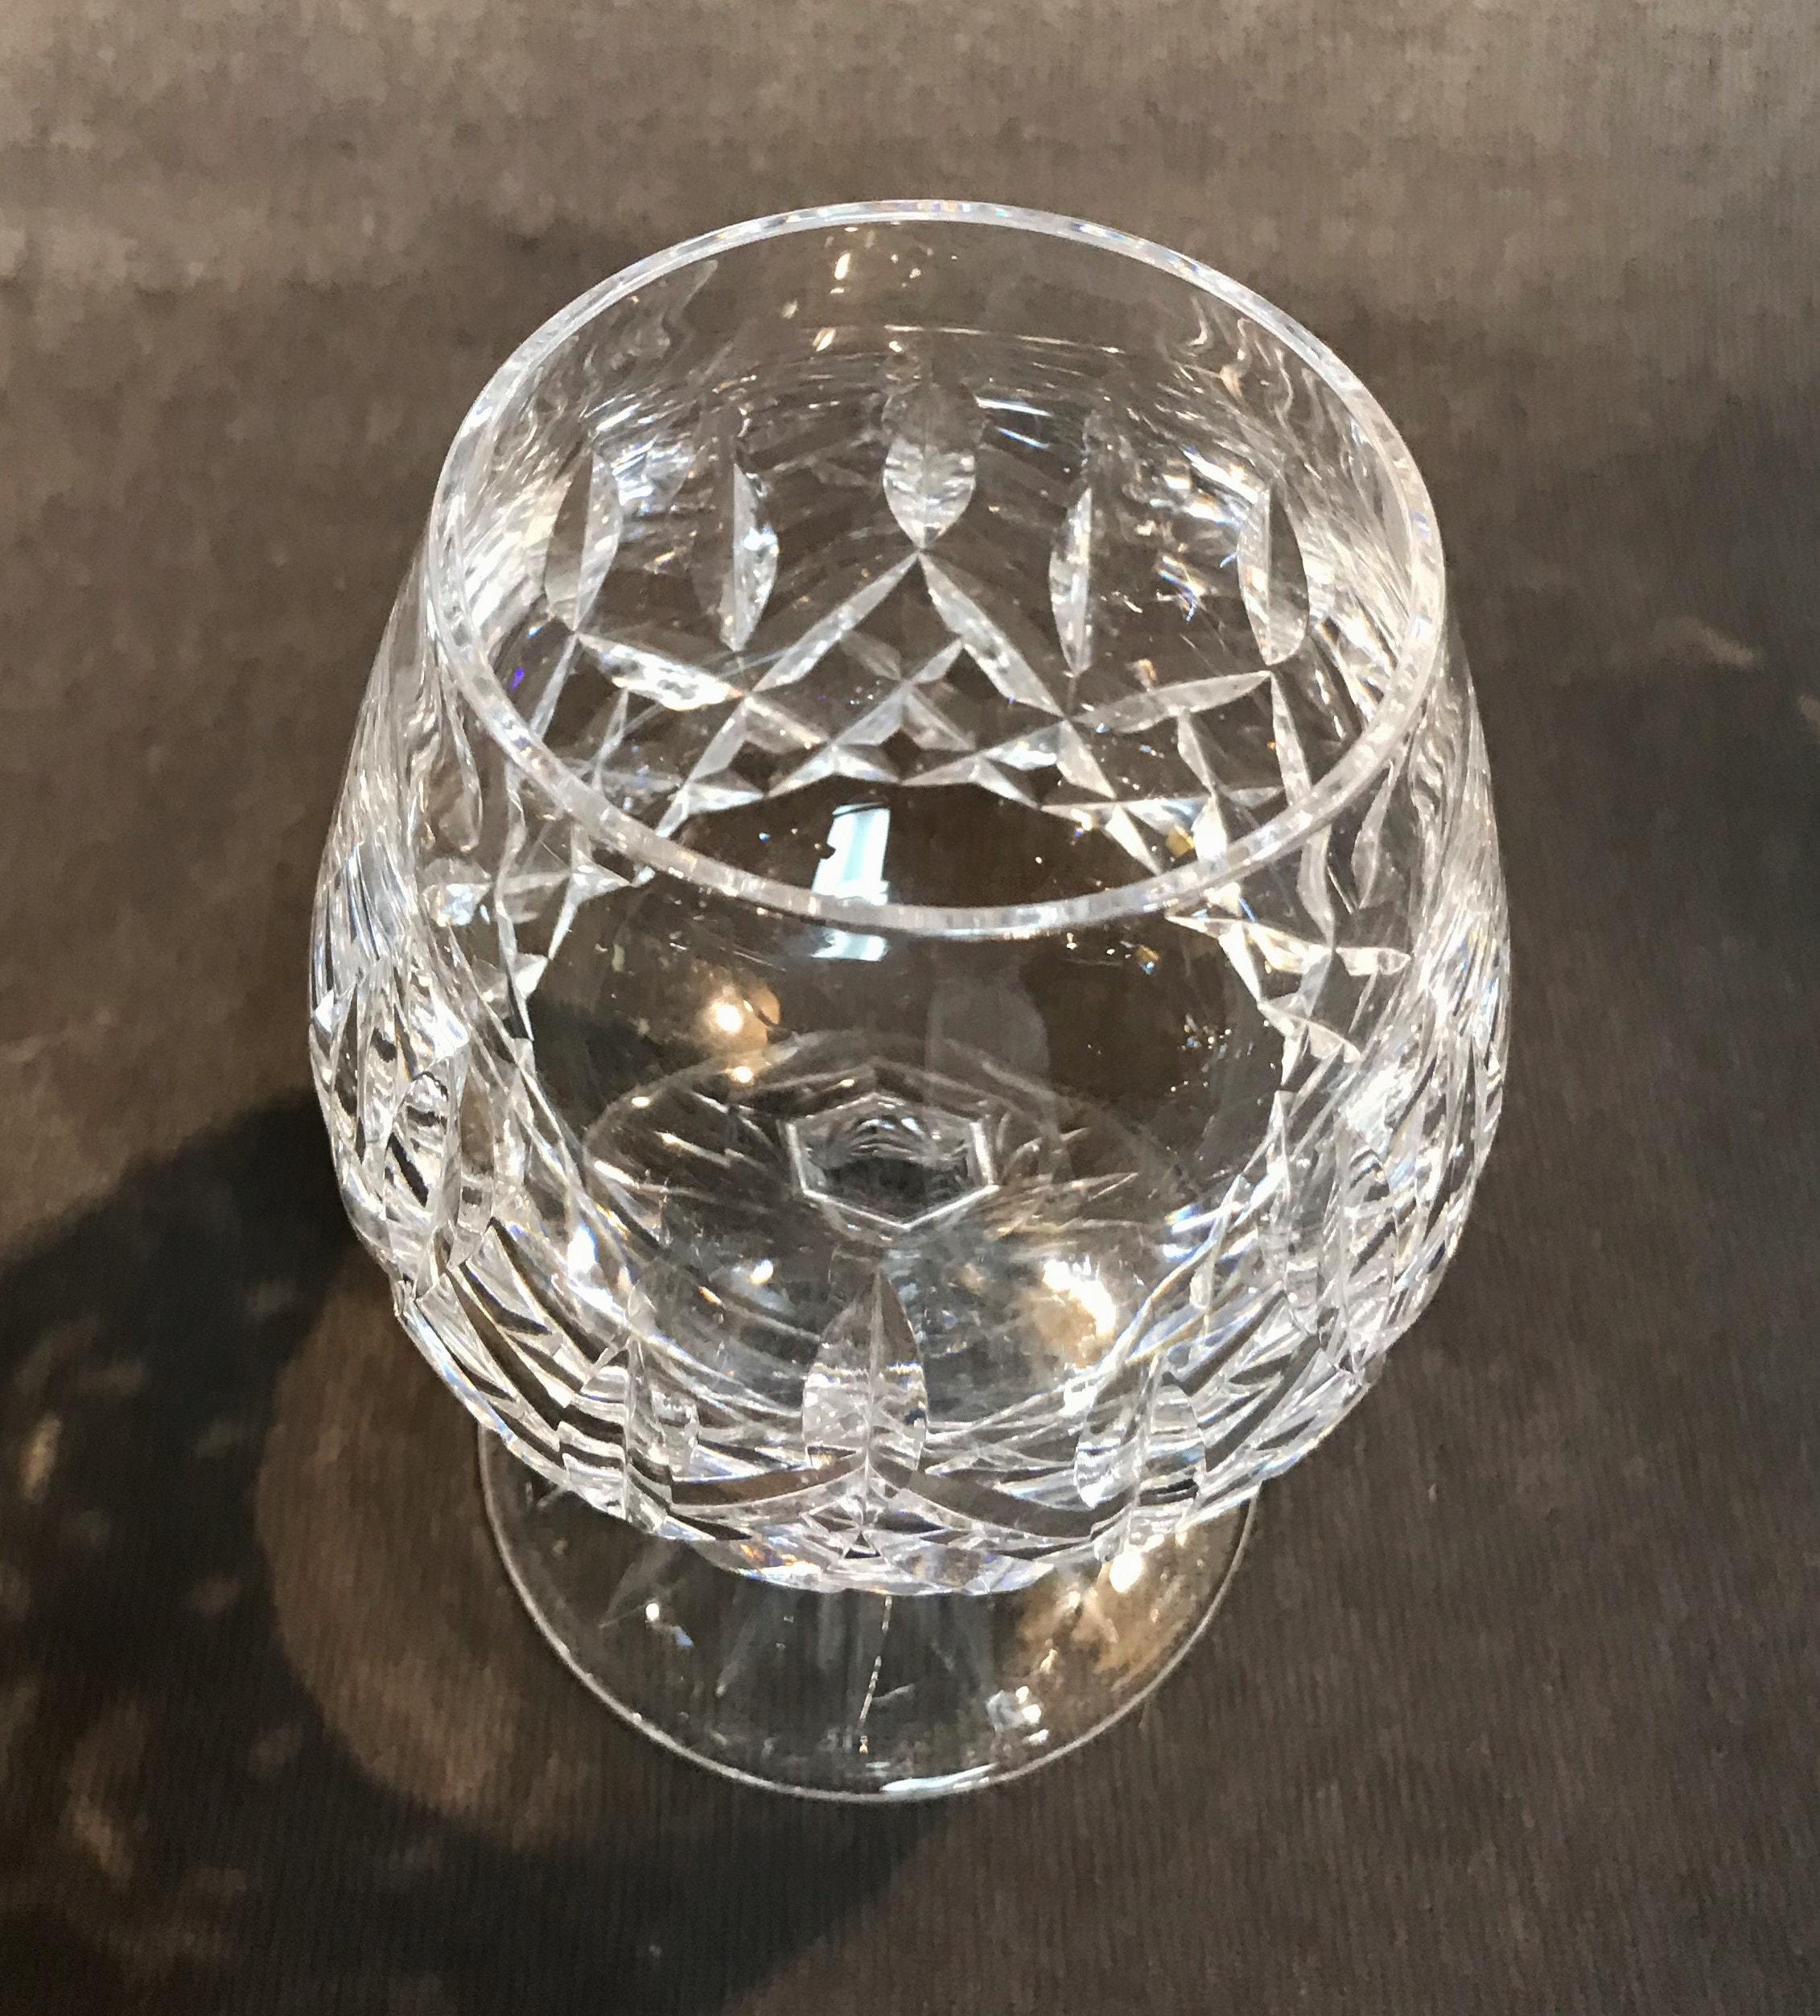 WATERFORD CRYSTAL LISMORE BRANDY SNIFTER GLASS